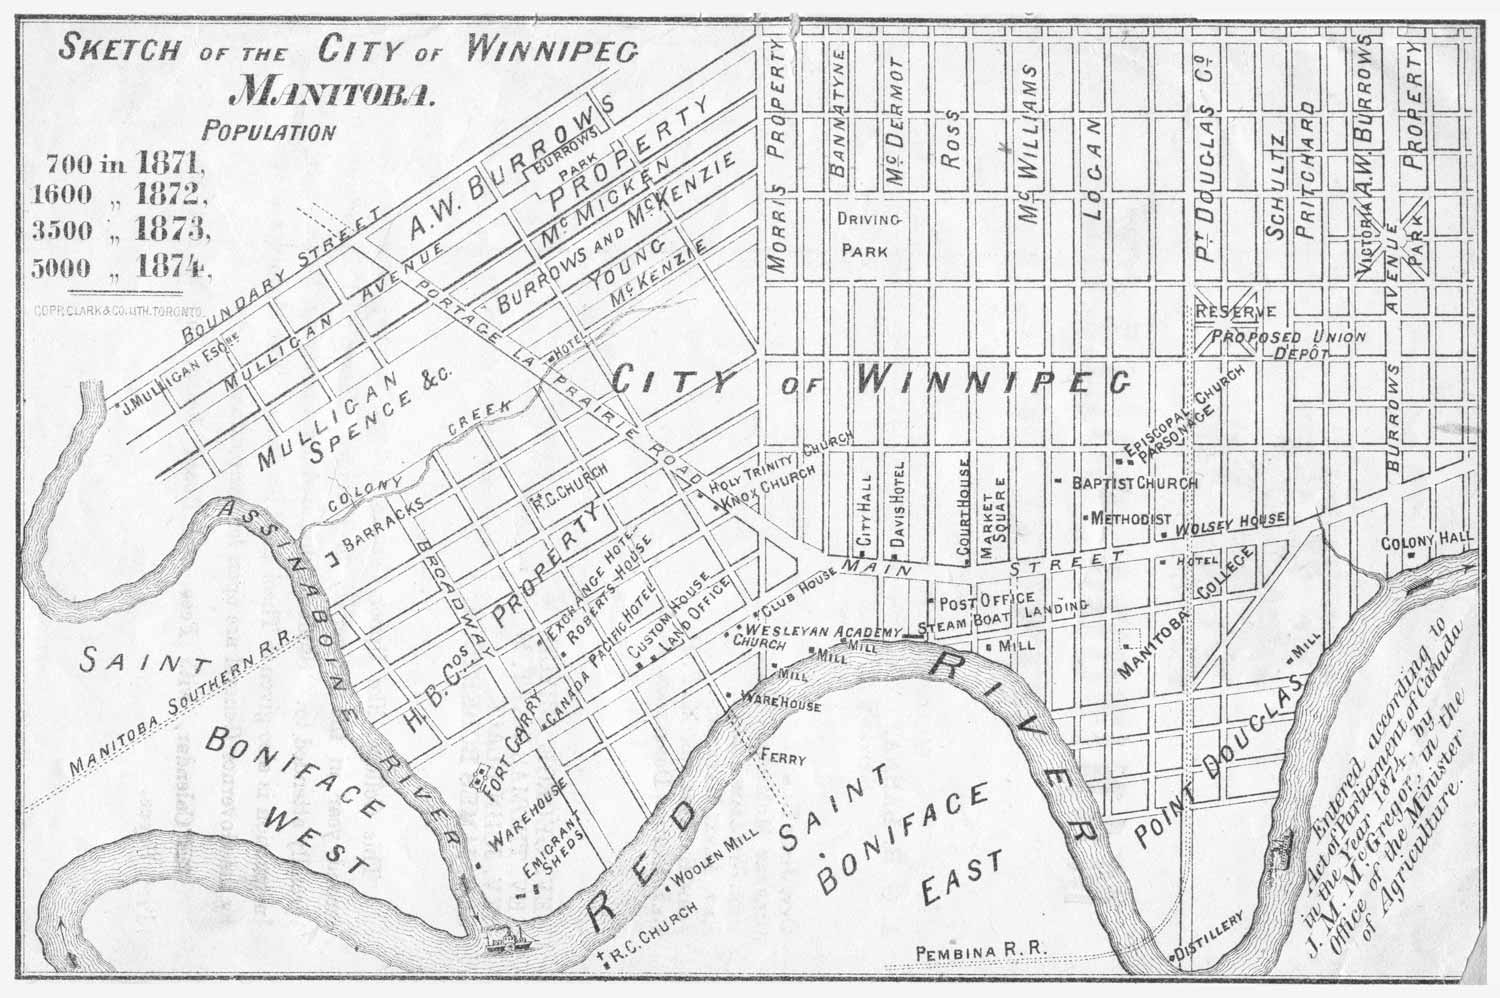 A pencil-drawn map of Winnipeg in 1874, focusing on St. Boniface, downtown, and Point Douglas areas.